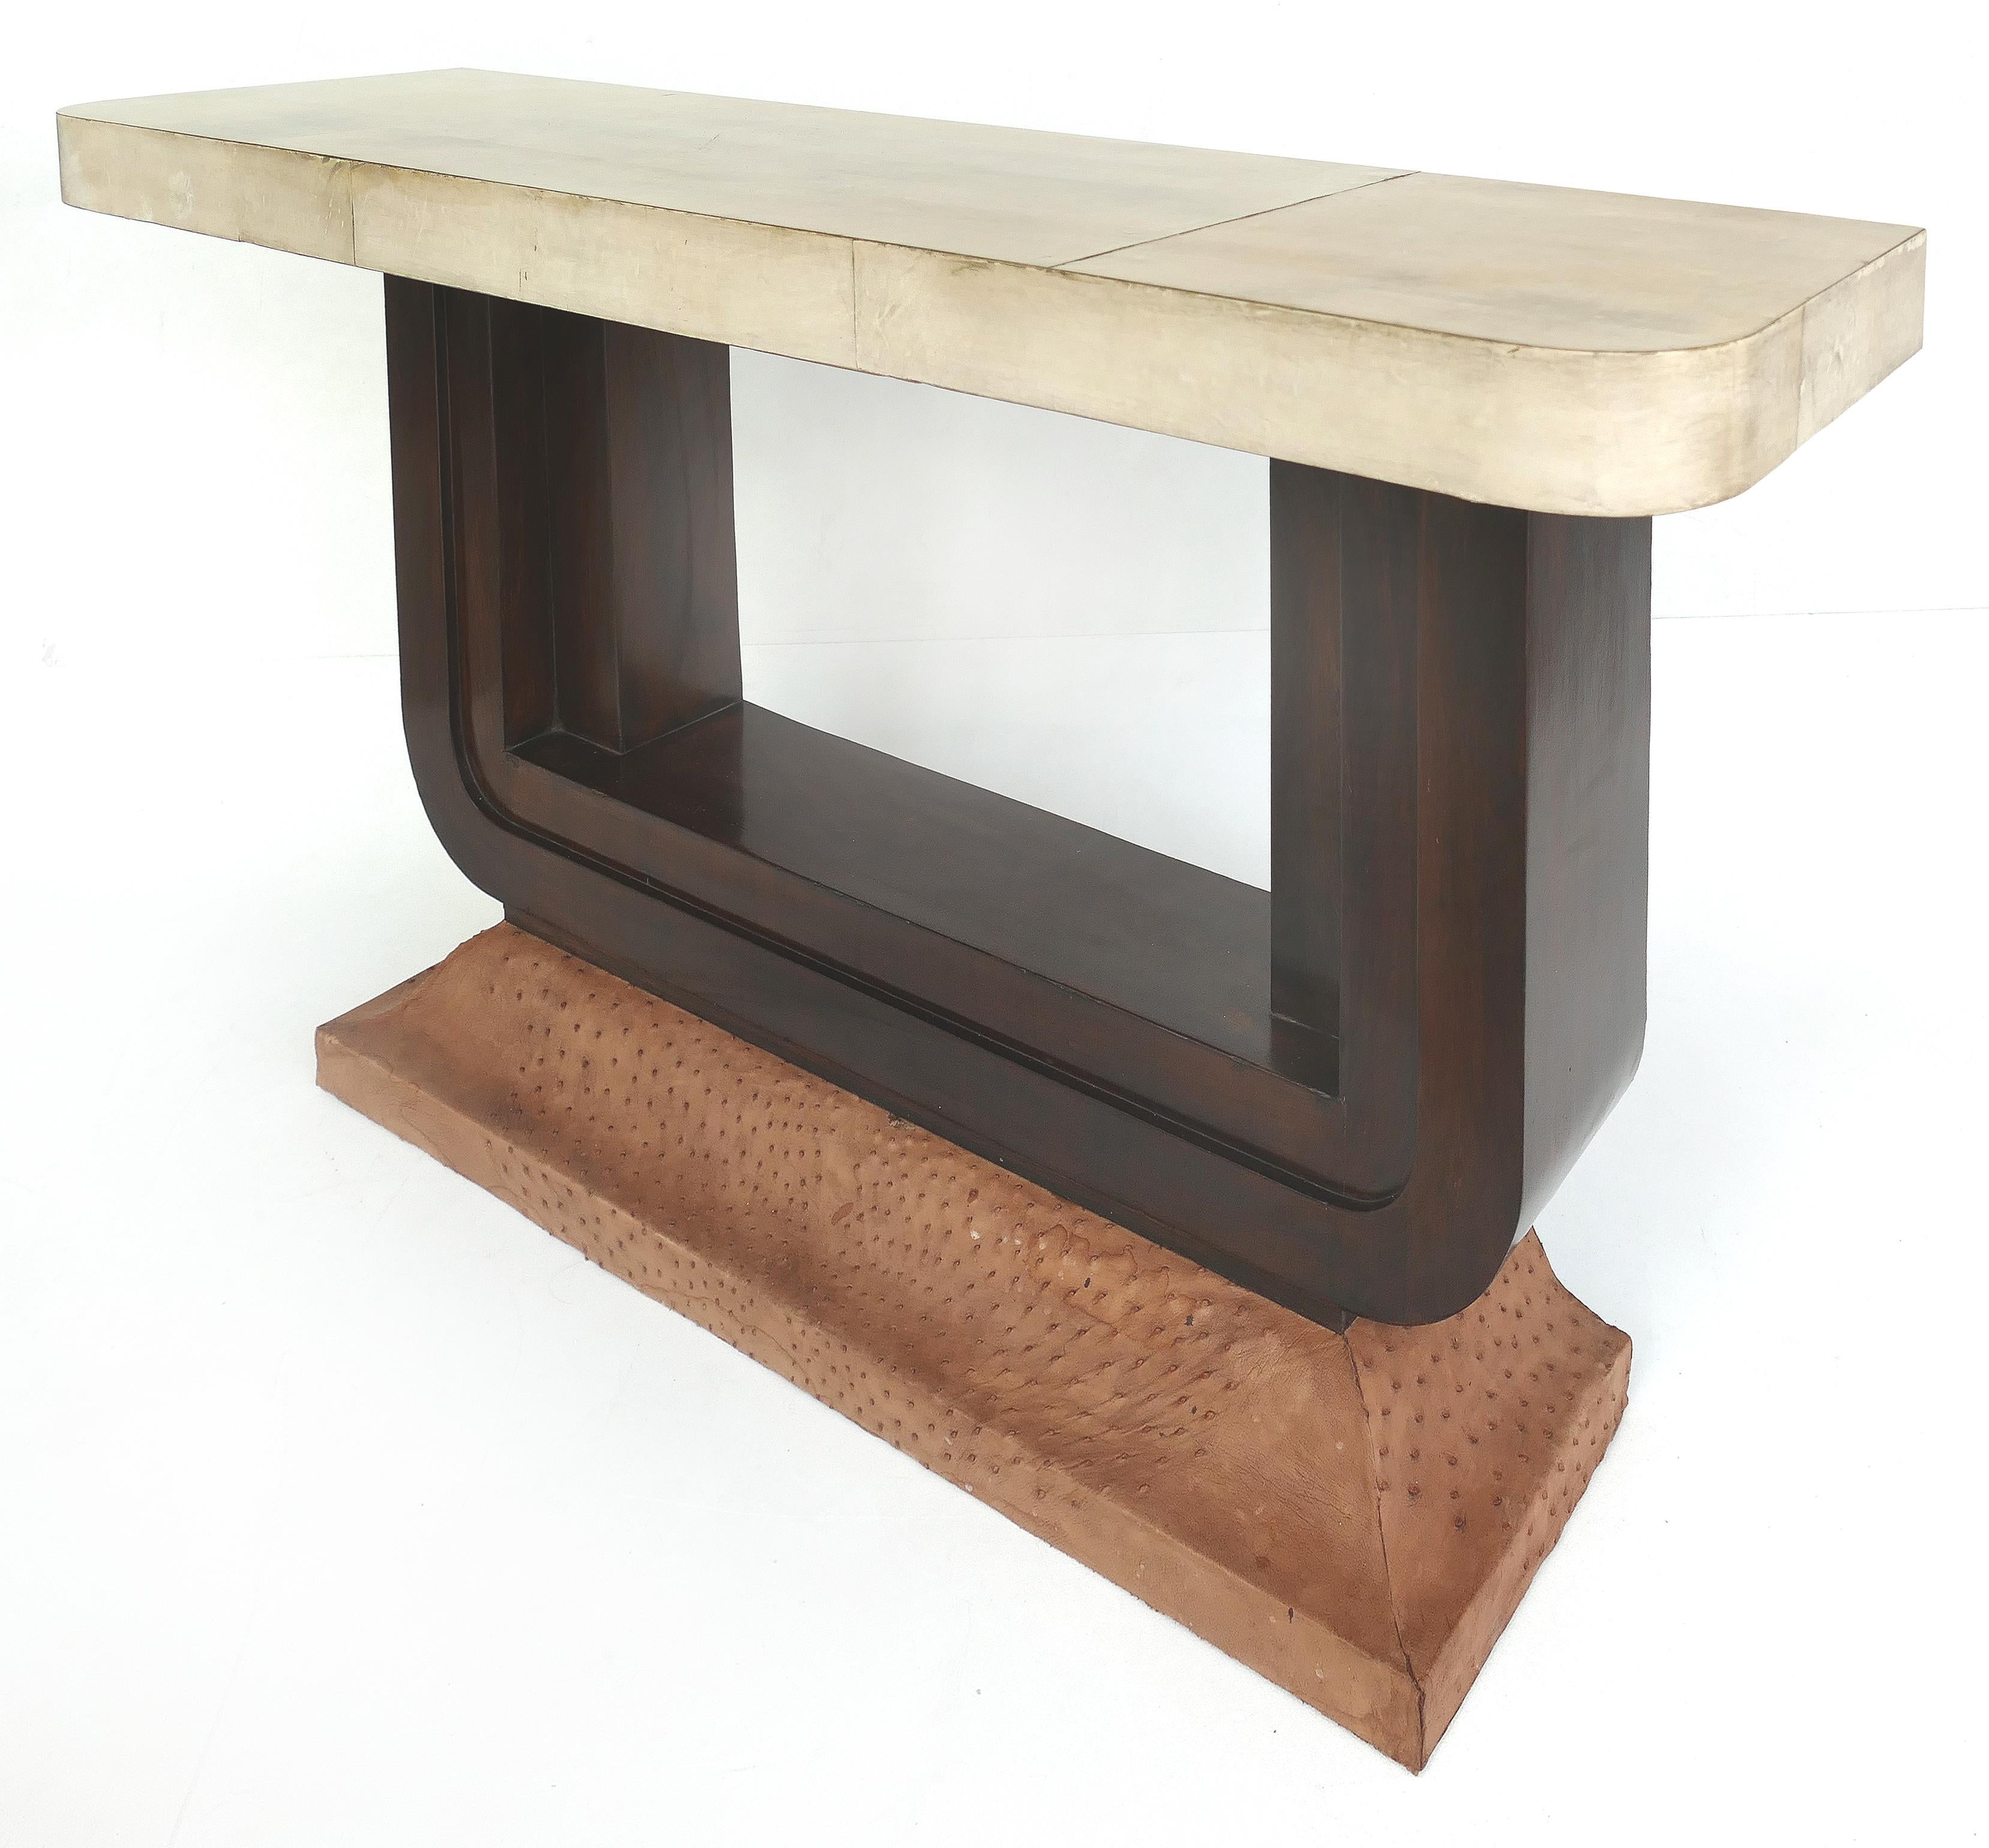 Art Deco goatskin and ostrich clad console tables, pair


Offered for sale is a rare and elegant pair of Art Deco console tables with goatskin clad tops and ostrich skin-clad bases. The tops are supported by 